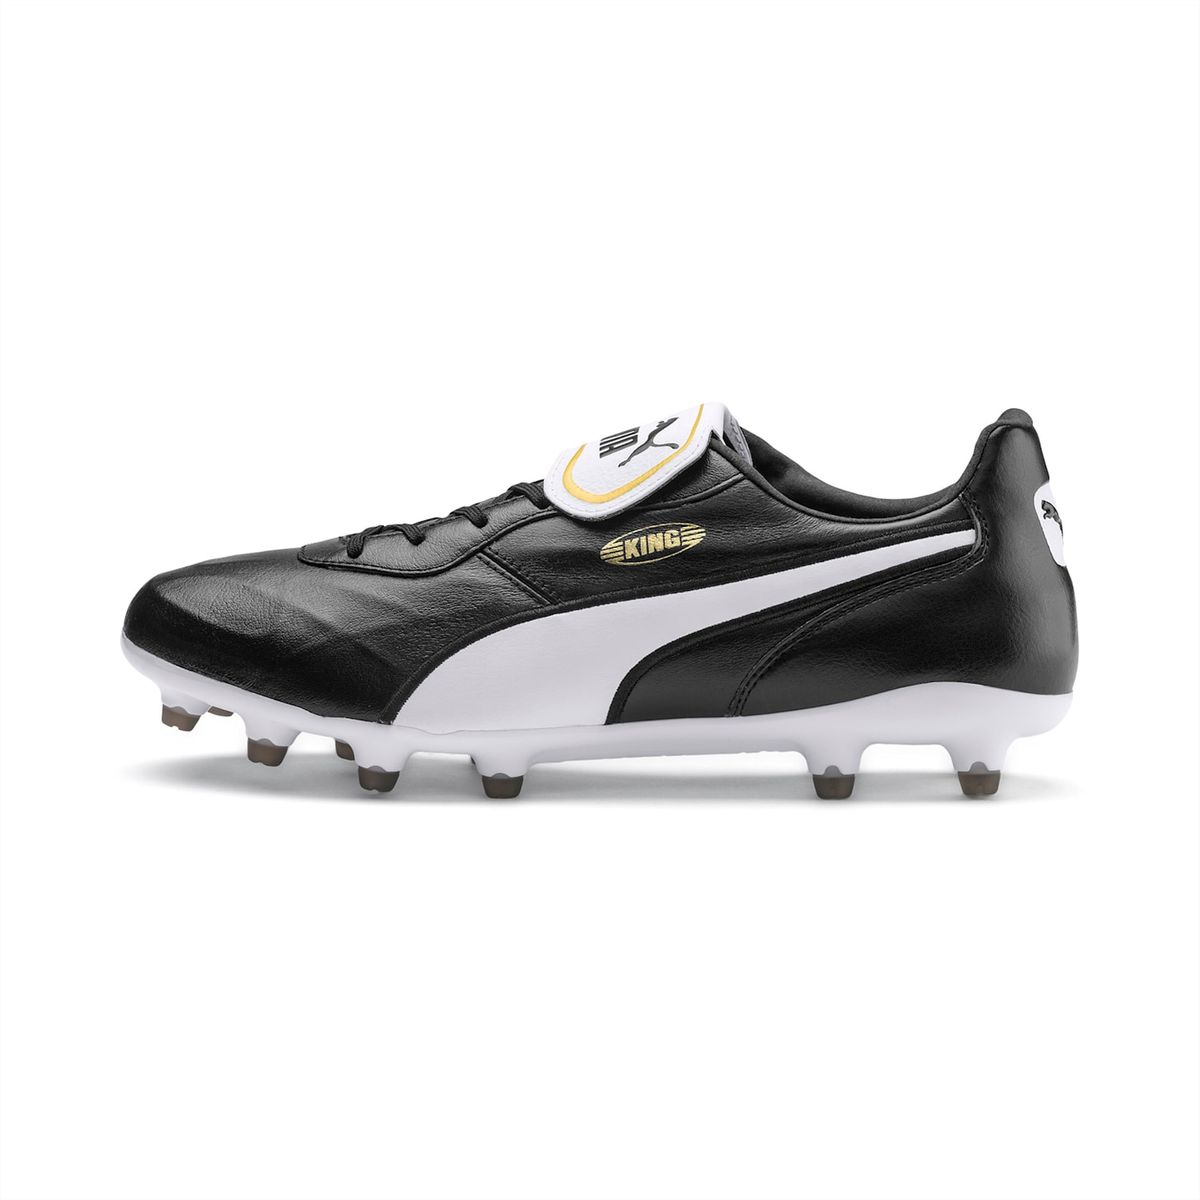 best synthetic soccer cleats